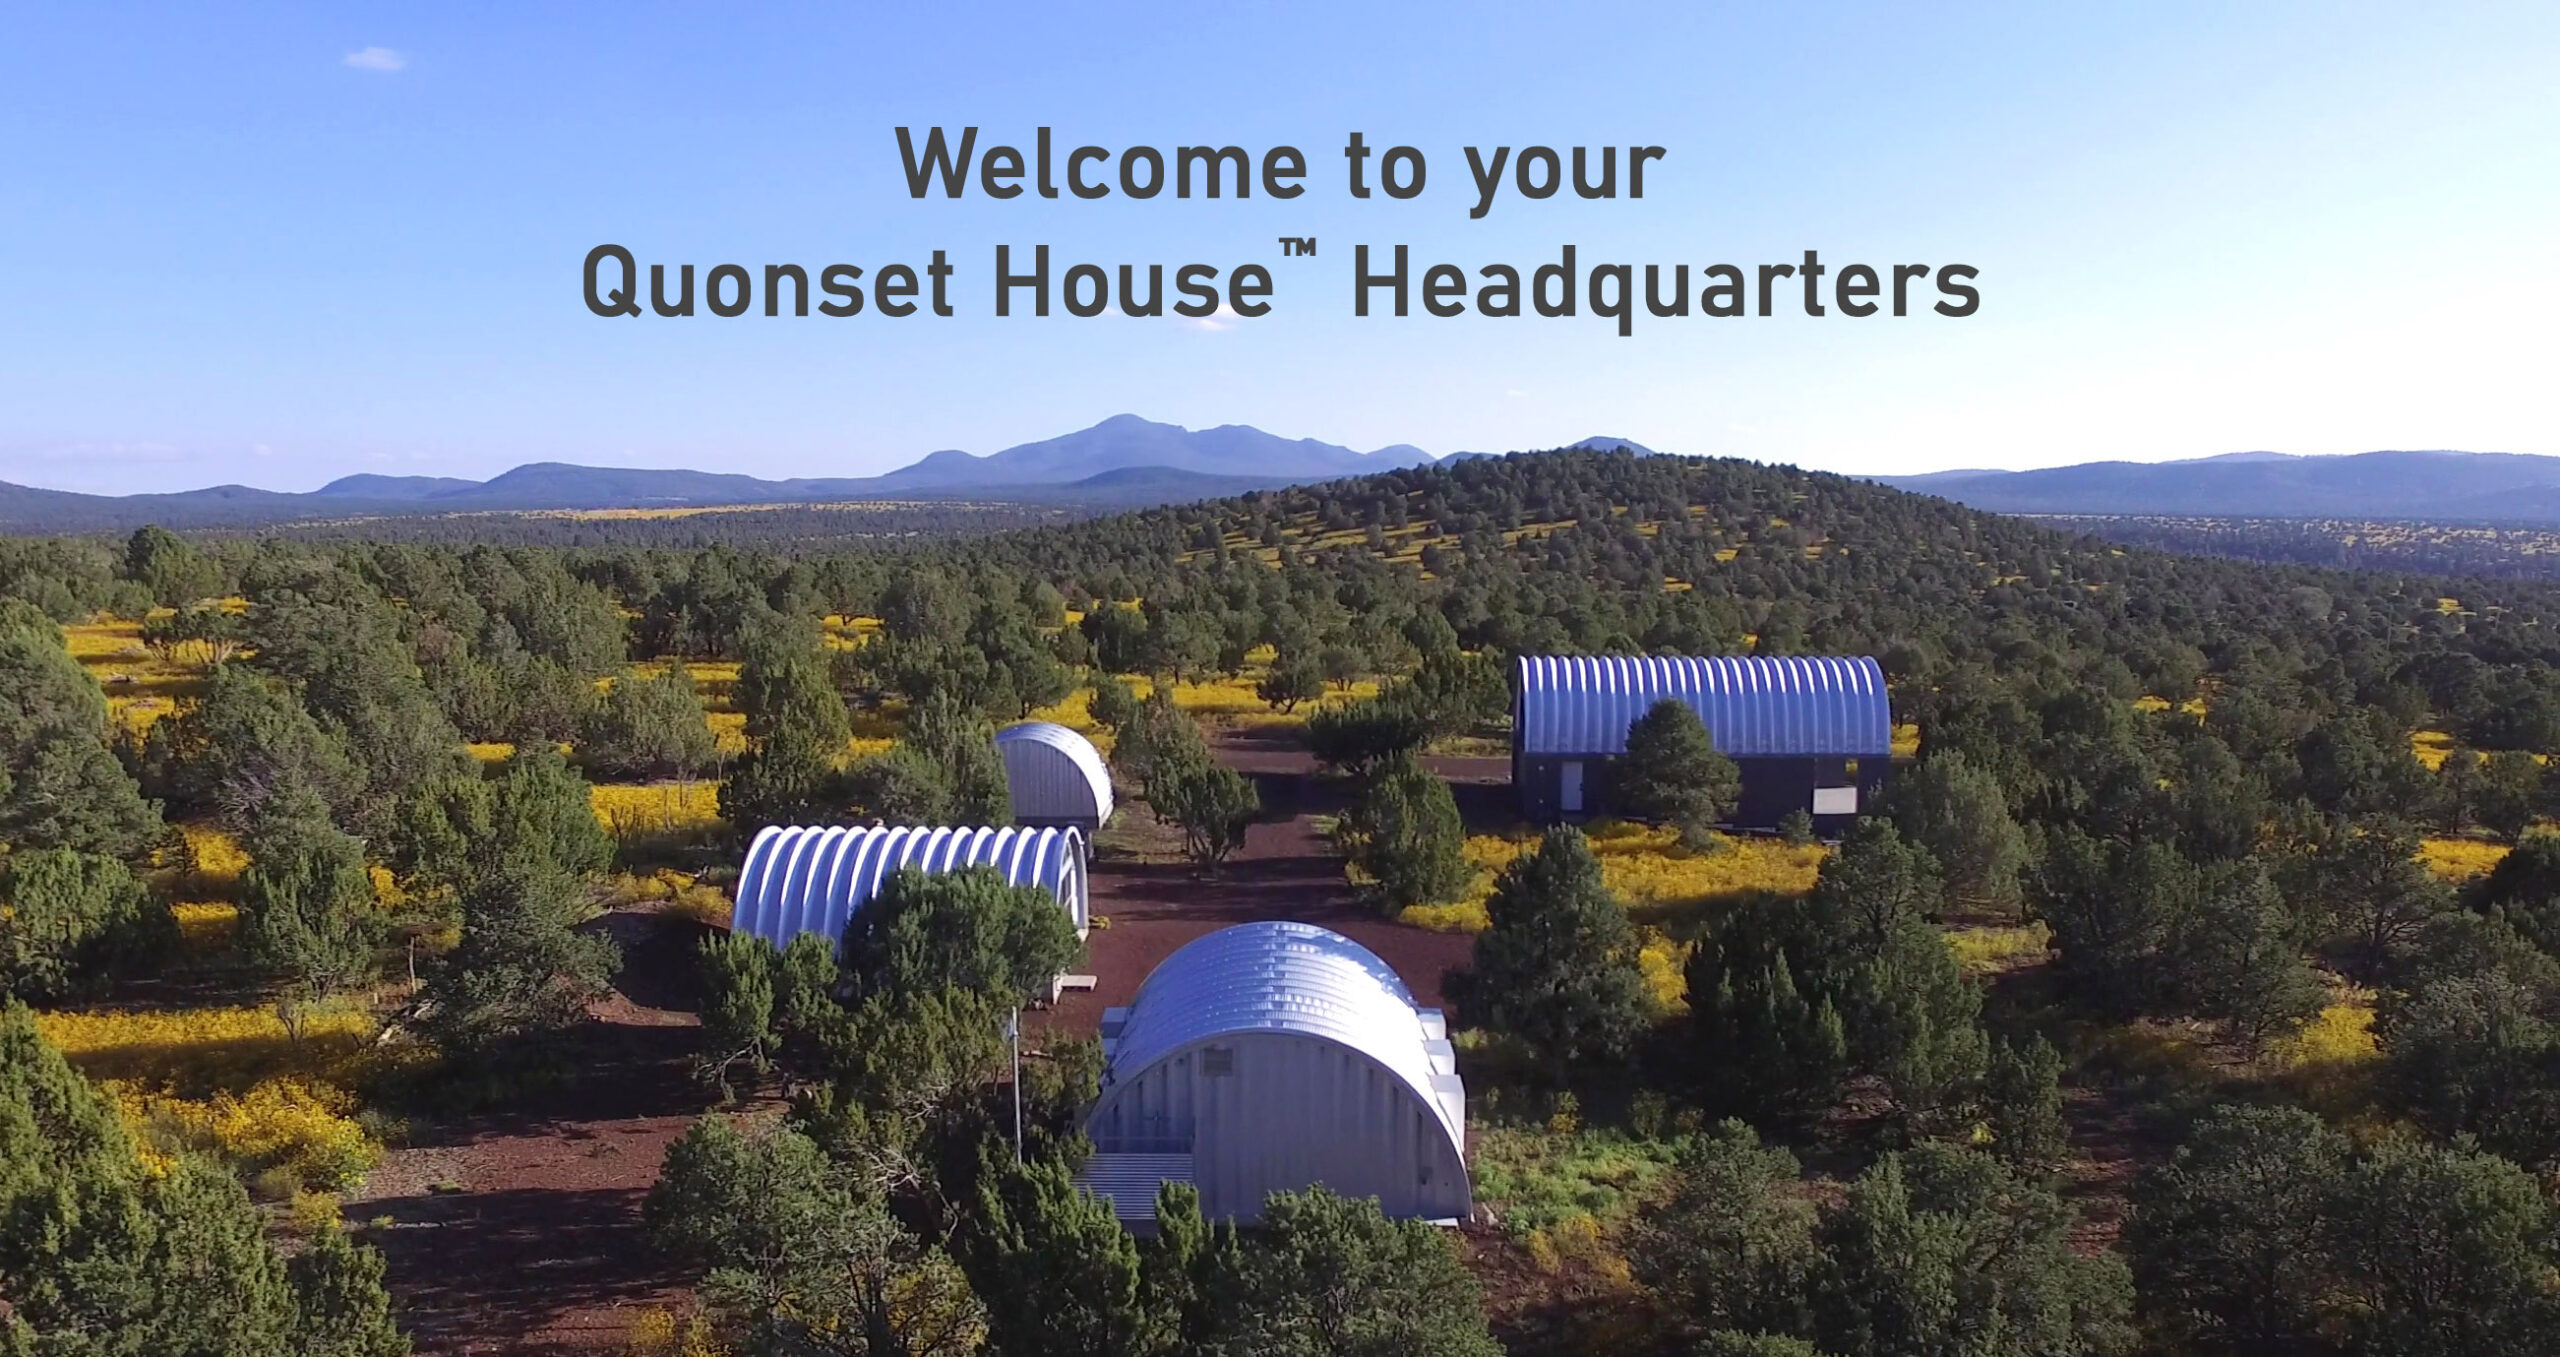 Image of a landscape mountains in the distance and Quonset huts in the foreground, and the words, "Welcome to your Quonset House headquarters."